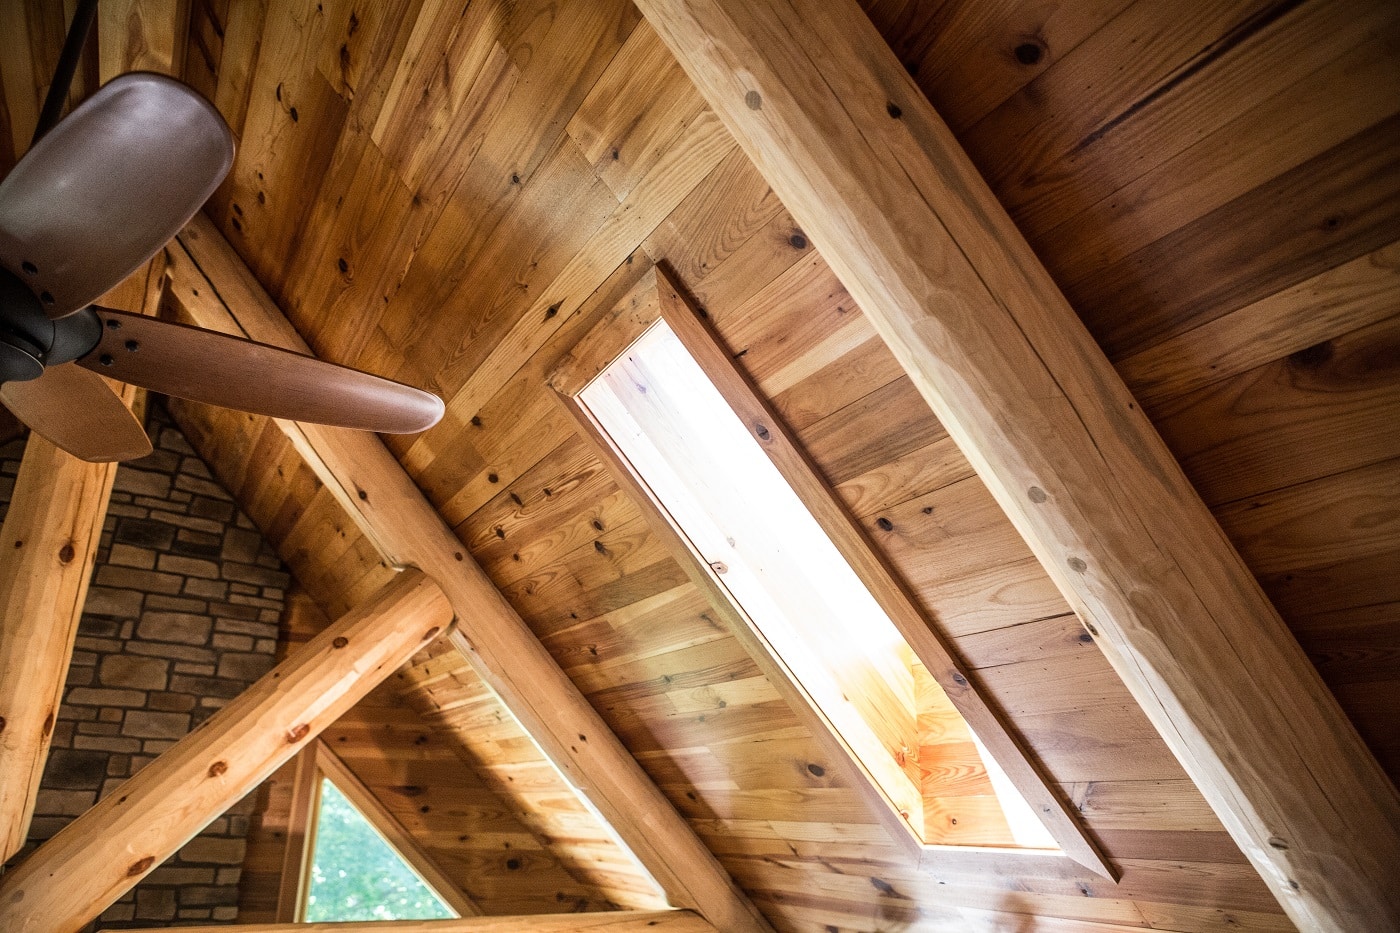  vaulted ceiling in a cabin-style home